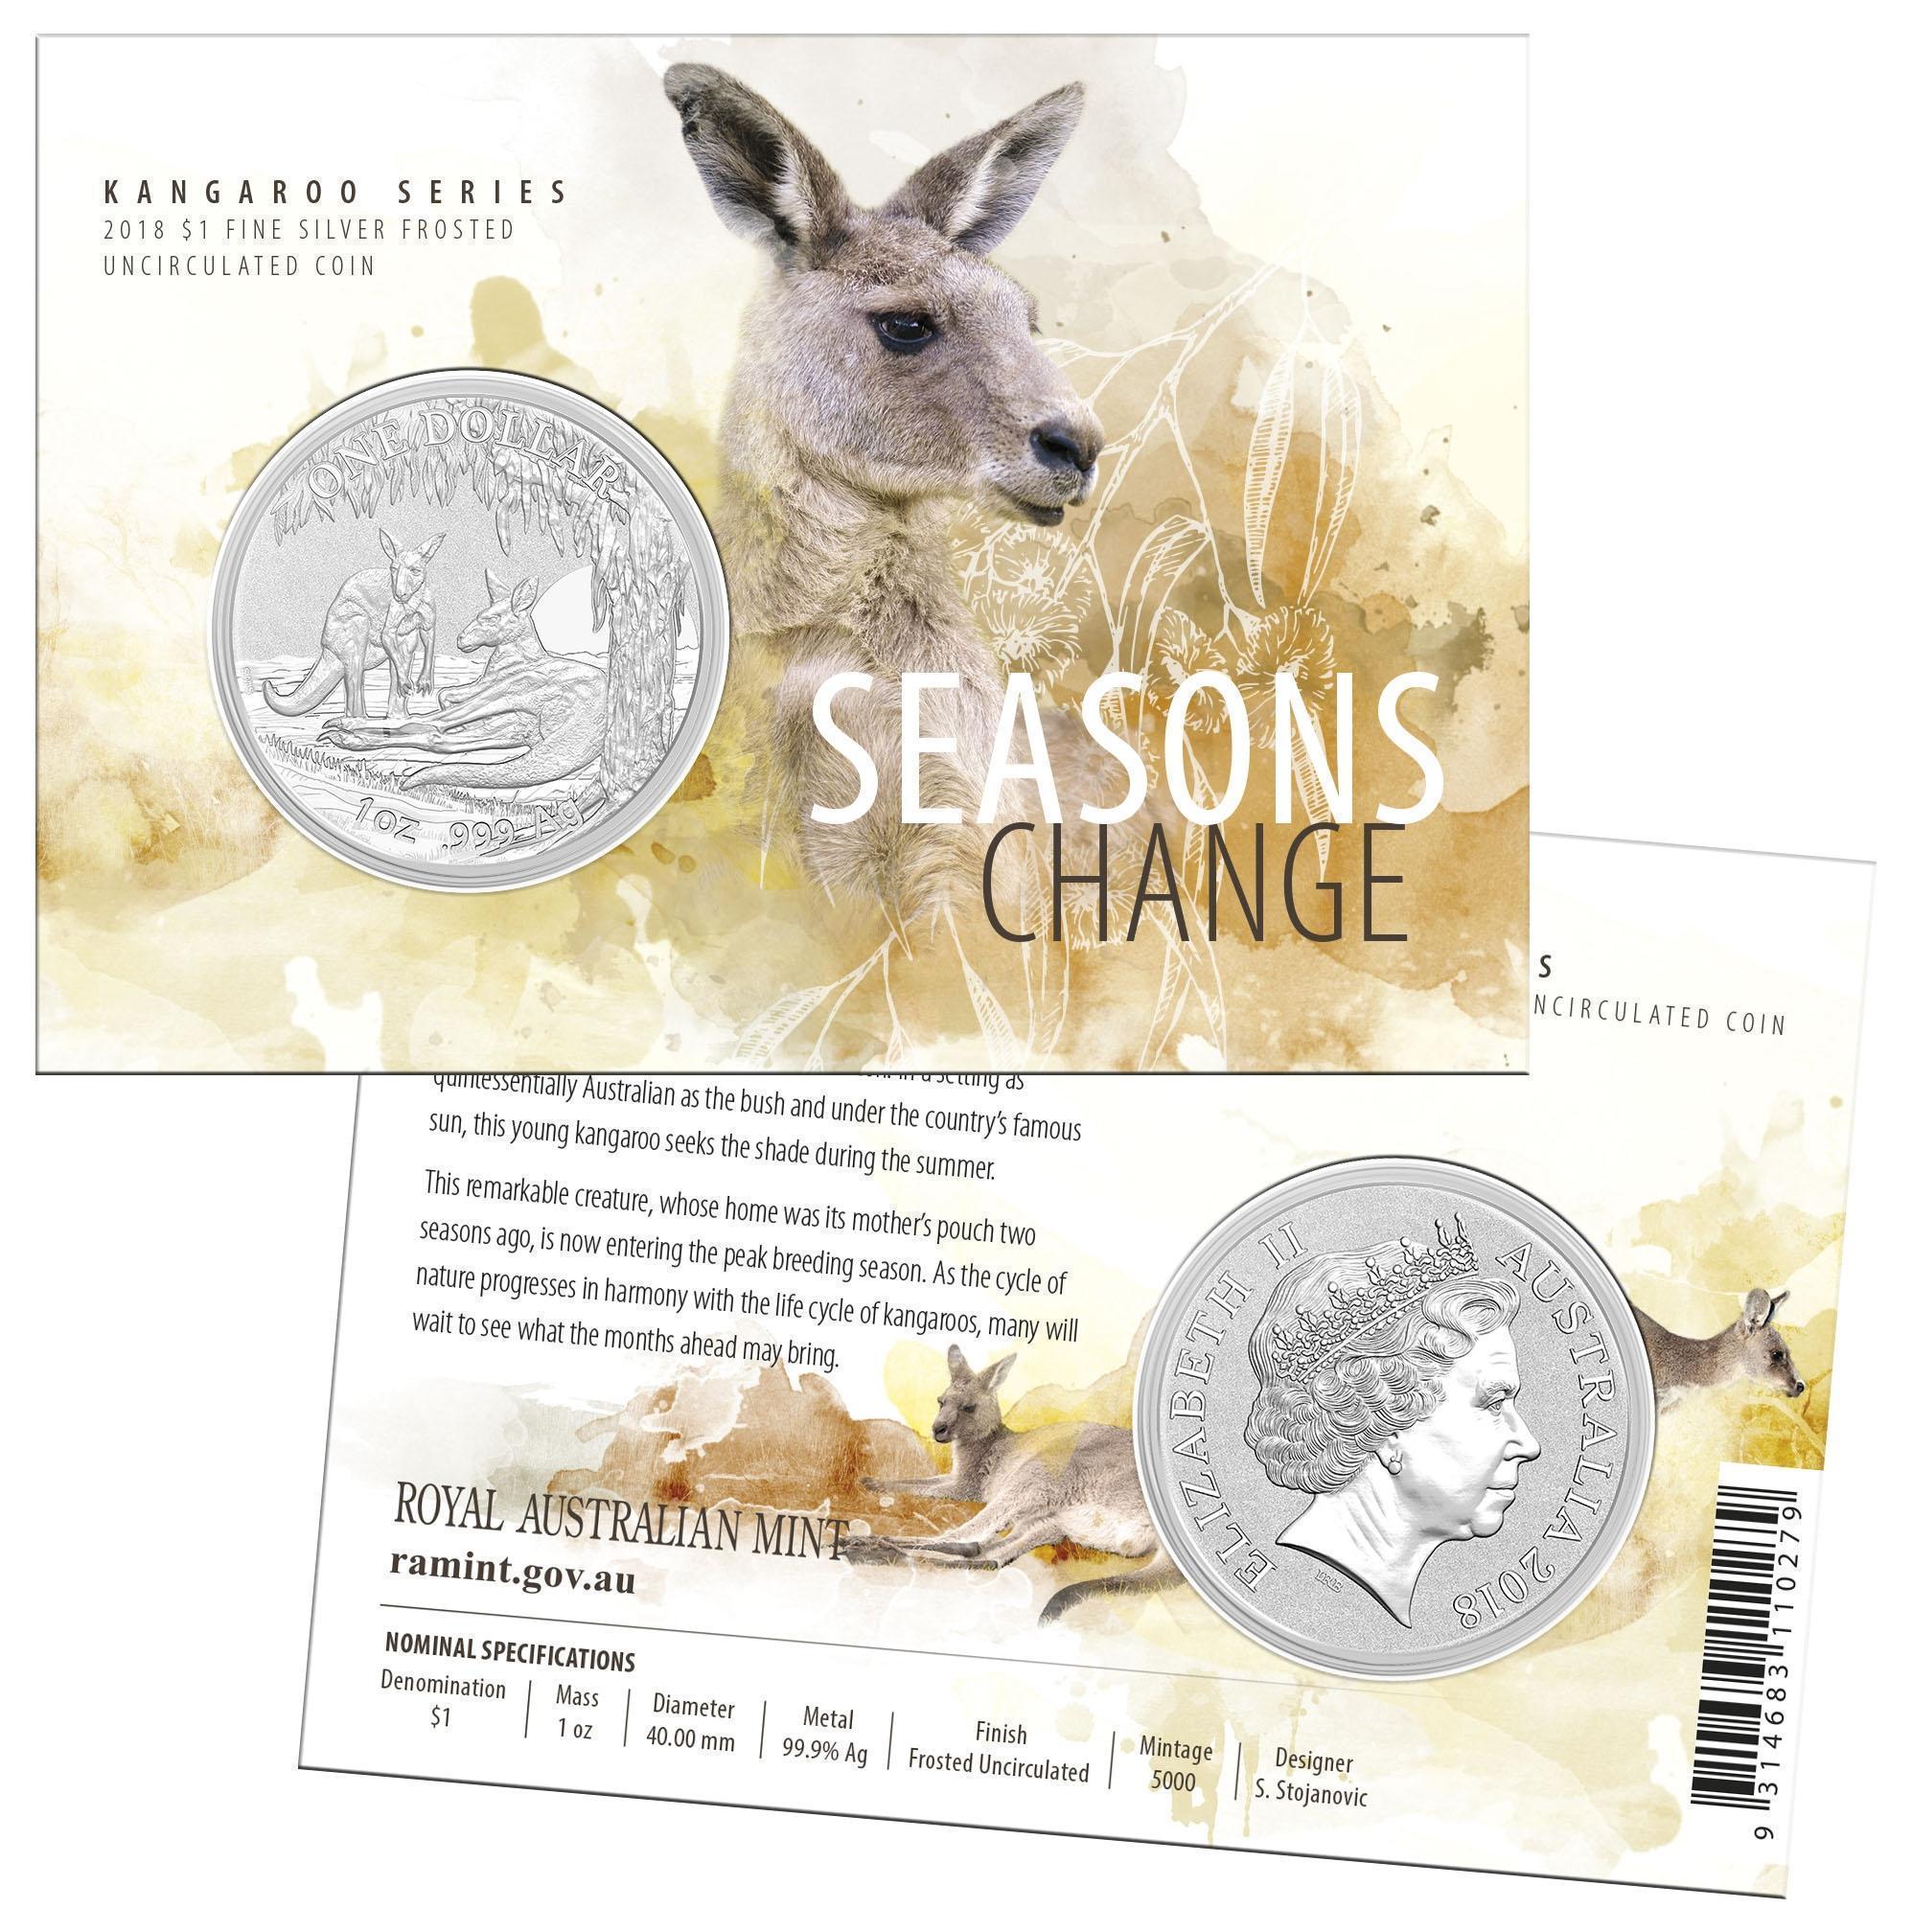 2018 $1 Silver Frosted Uncirculated Kangaroo Coin Series 